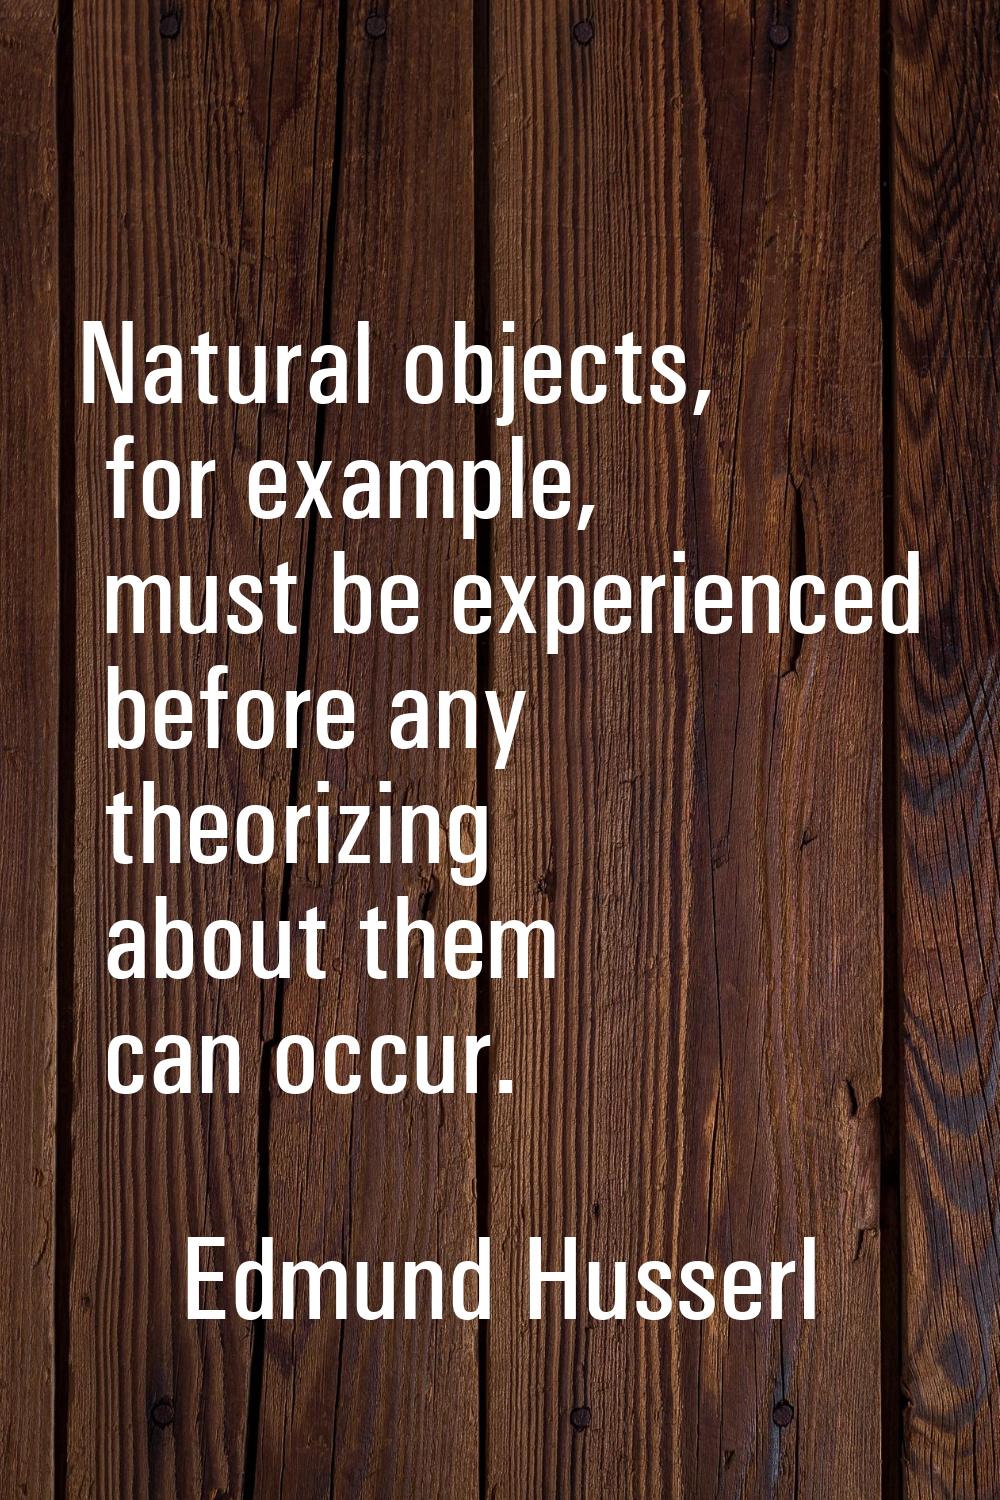 Natural objects, for example, must be experienced before any theorizing about them can occur.